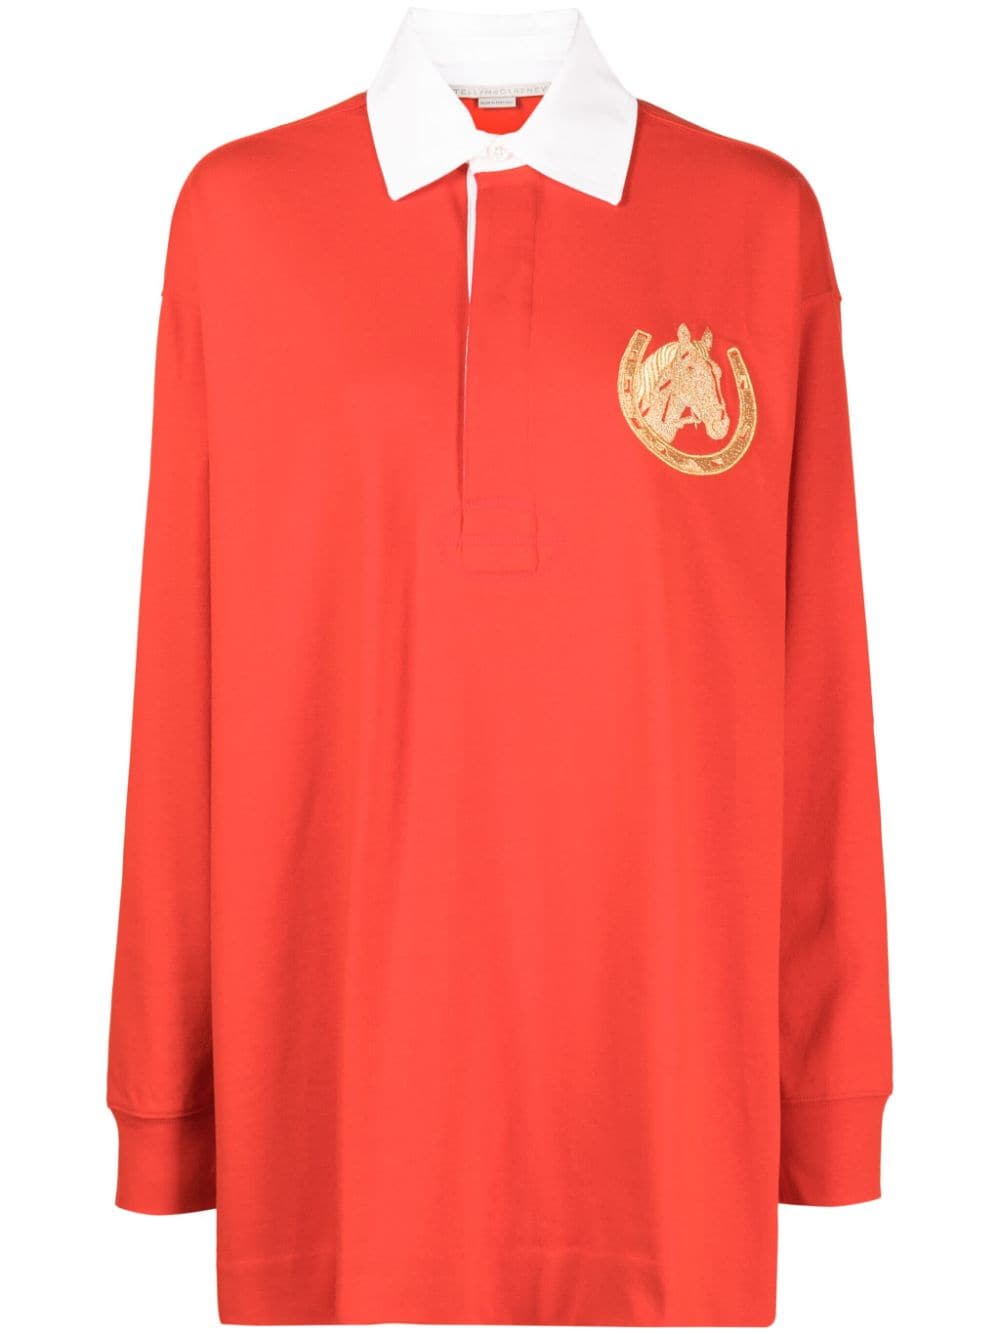 STELLA MCCARTNEY PONY CLUB-EMBROIDERED RUGBY TOP